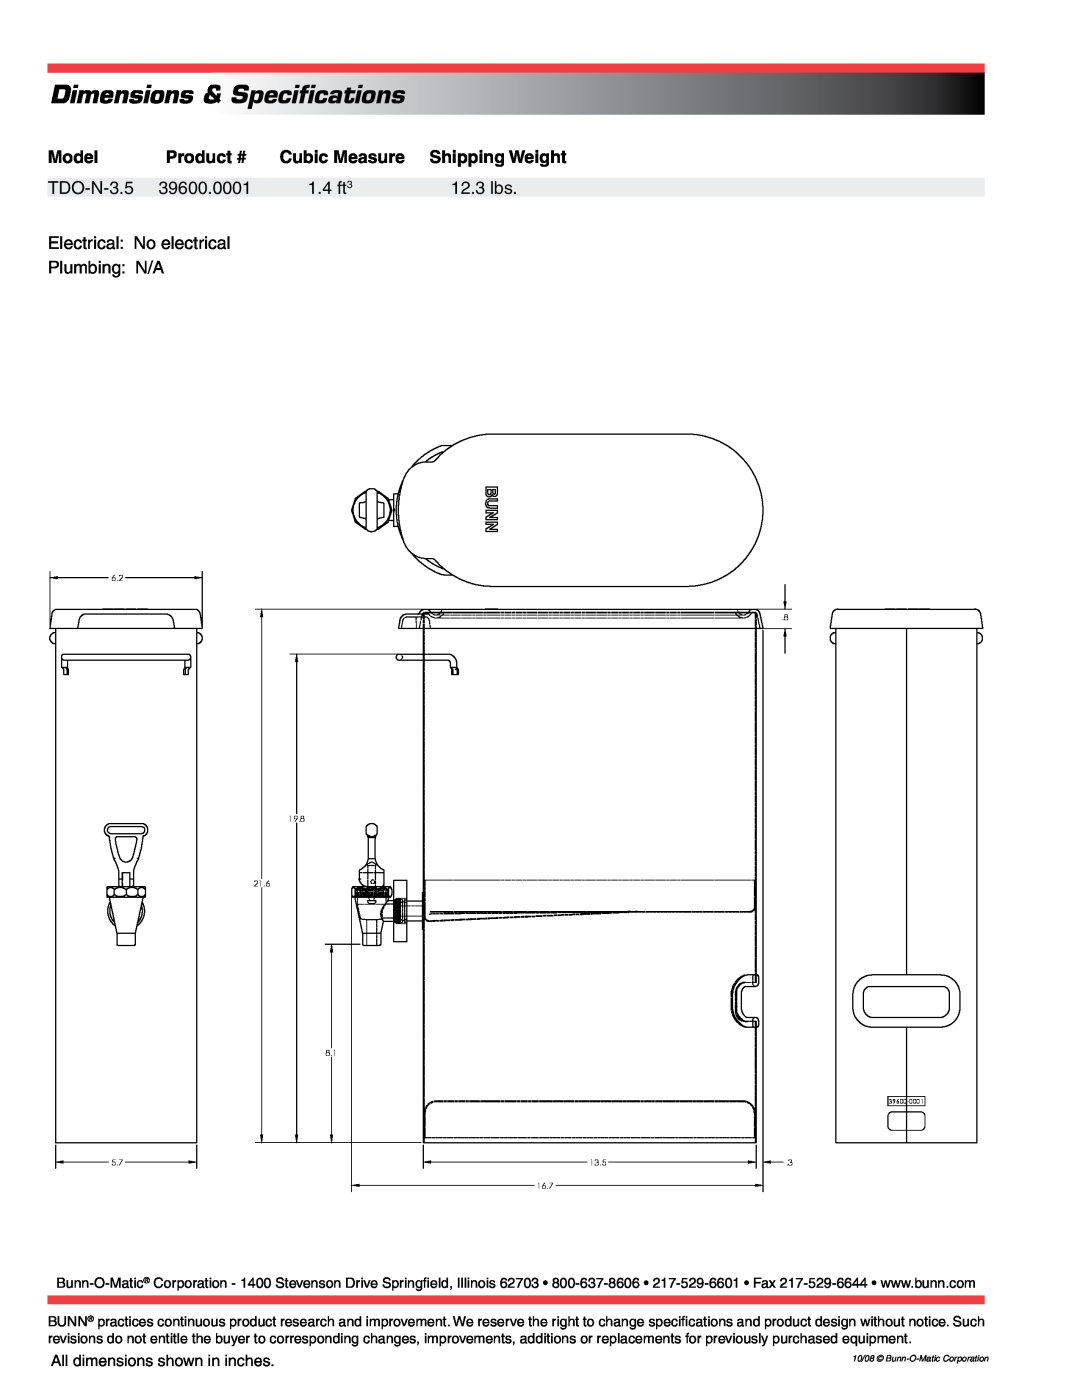 Bunn TDO-N-3.5 Electrical No electrical Plumbing N/A, All dimensions shown in inches, Dimensions & Specifications, Model 